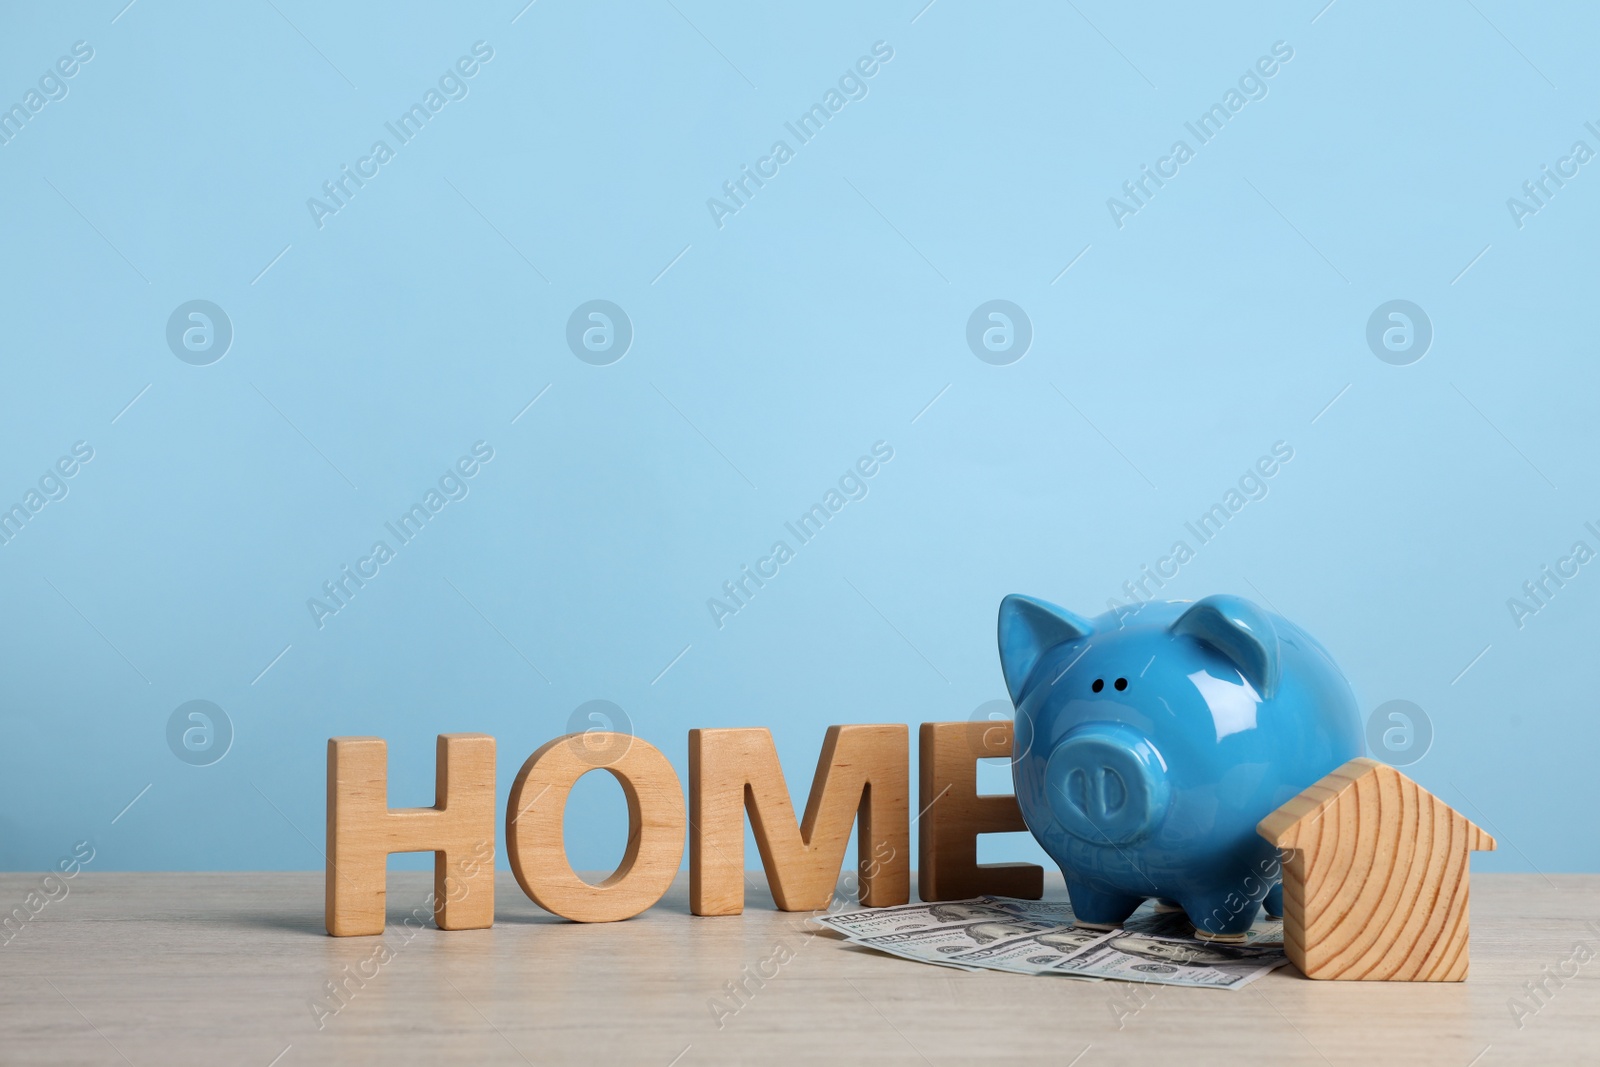 Photo of Piggy bank, house model, banknotes and word Home made of wooden letters on table. Space for text